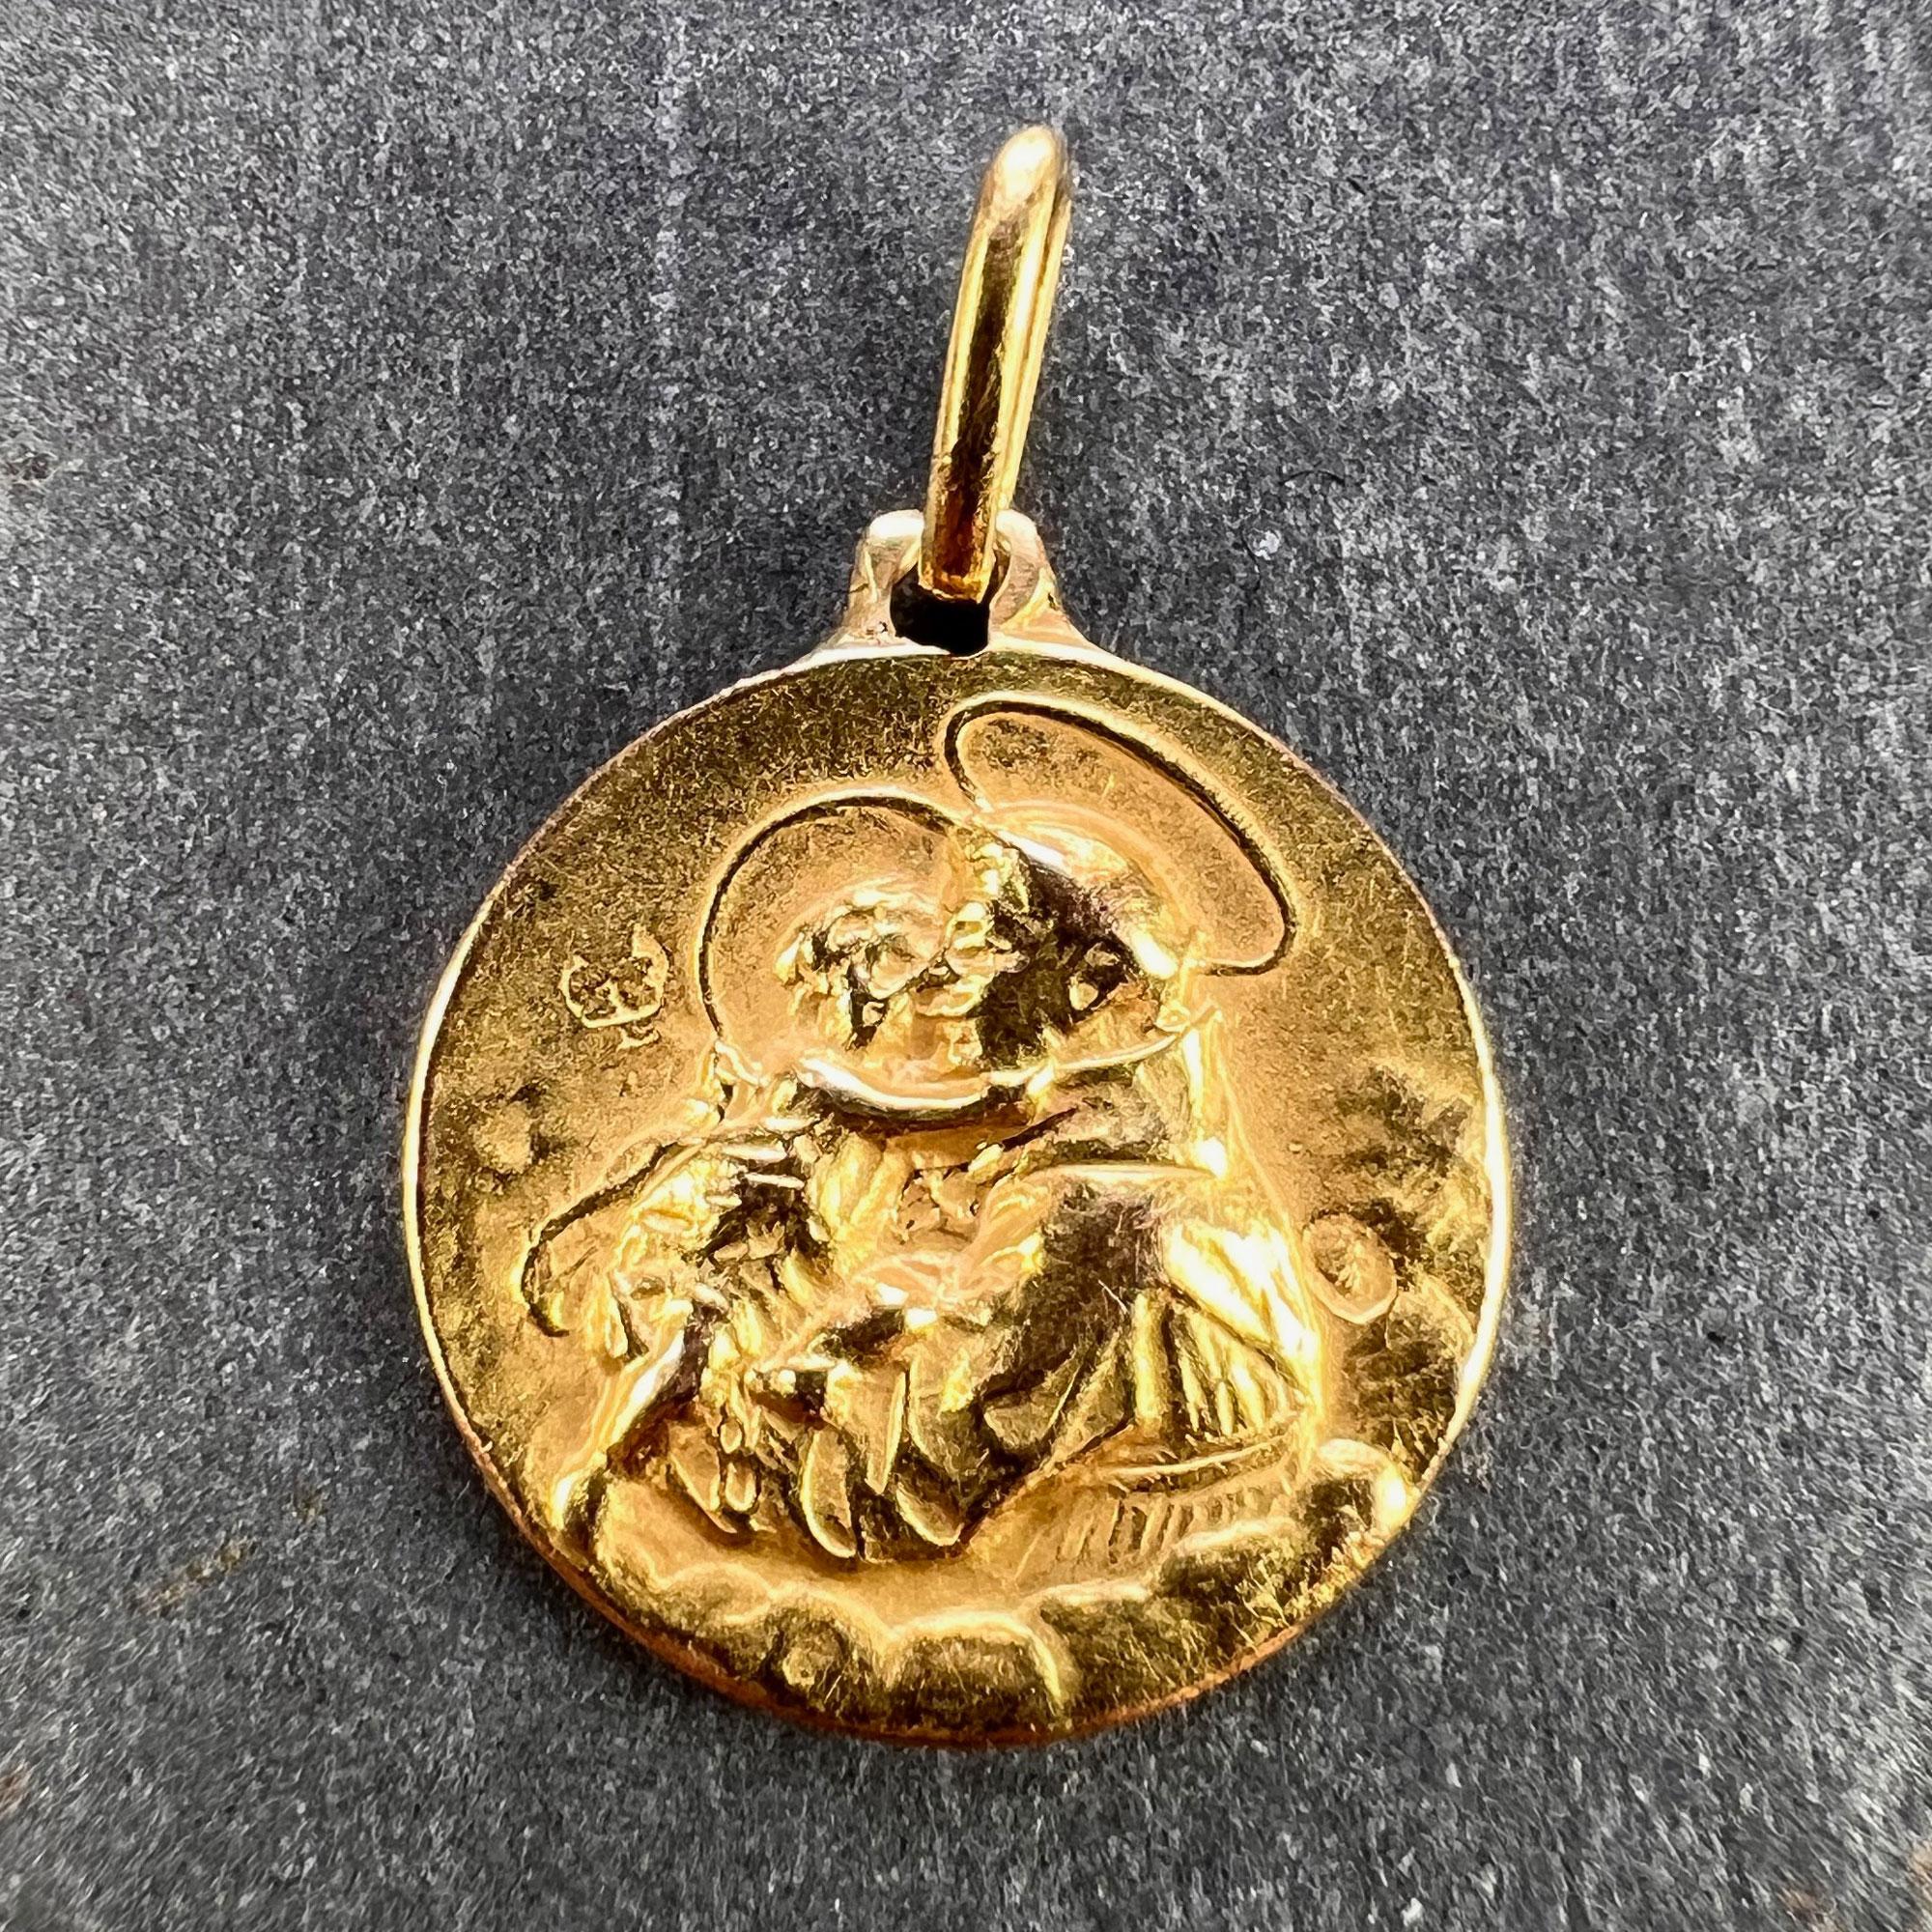 A French 18 karat (18K) yellow gold charm pendant designed as a medal depicting St Christopher carrying the infant Christ across a river. Partially stamped with the eagle’s head for French manufacture and 18 carat gold.

Dimensions: 1.5 x 1.4 x 0.15